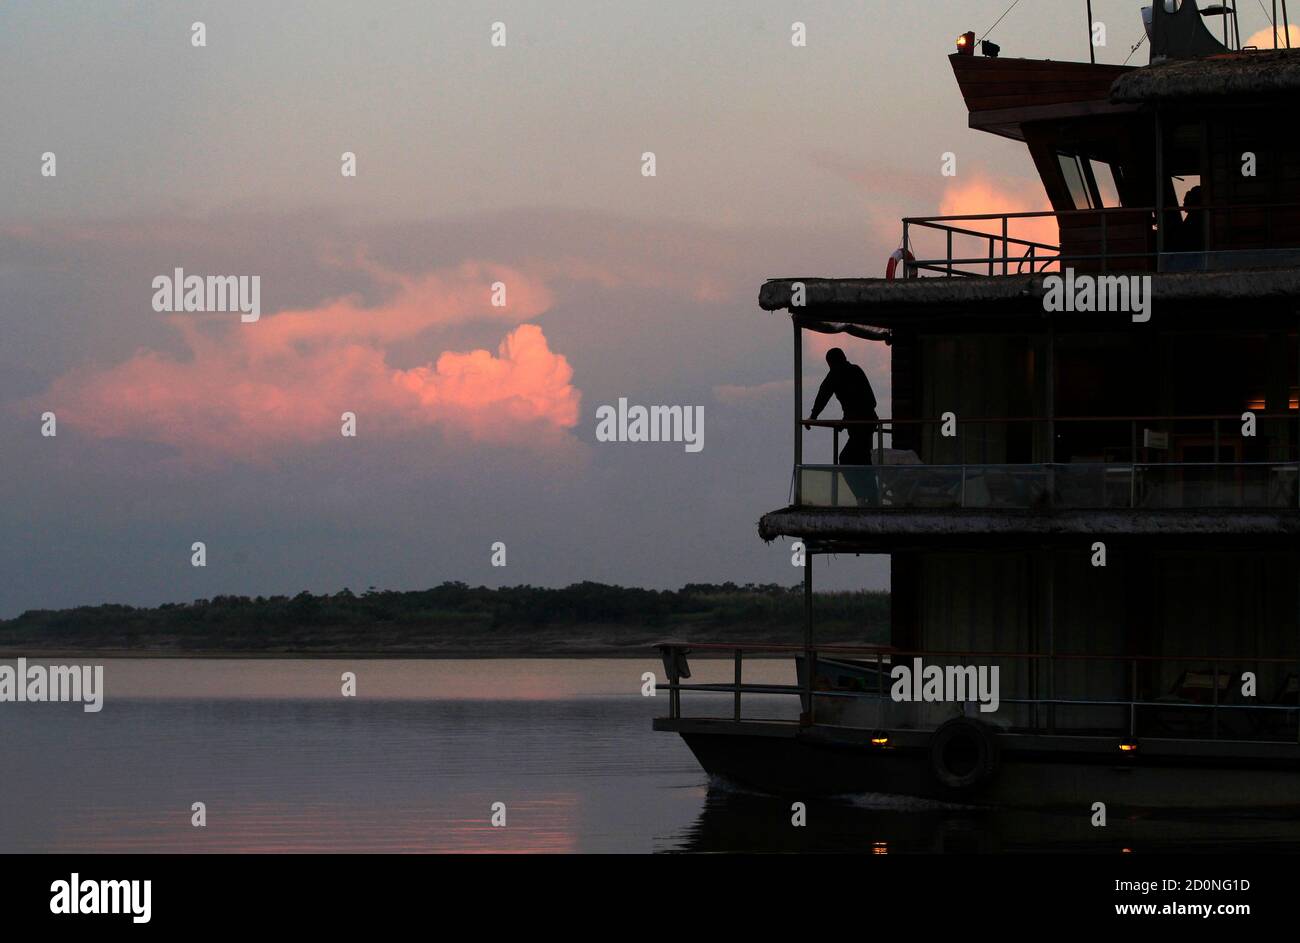 A man travels on a ship across the Maranon river, one of the two main  headwaters of the Amazon river, in Iquitos September 2, 2011. The  Geographic Society of Lima and Peru's